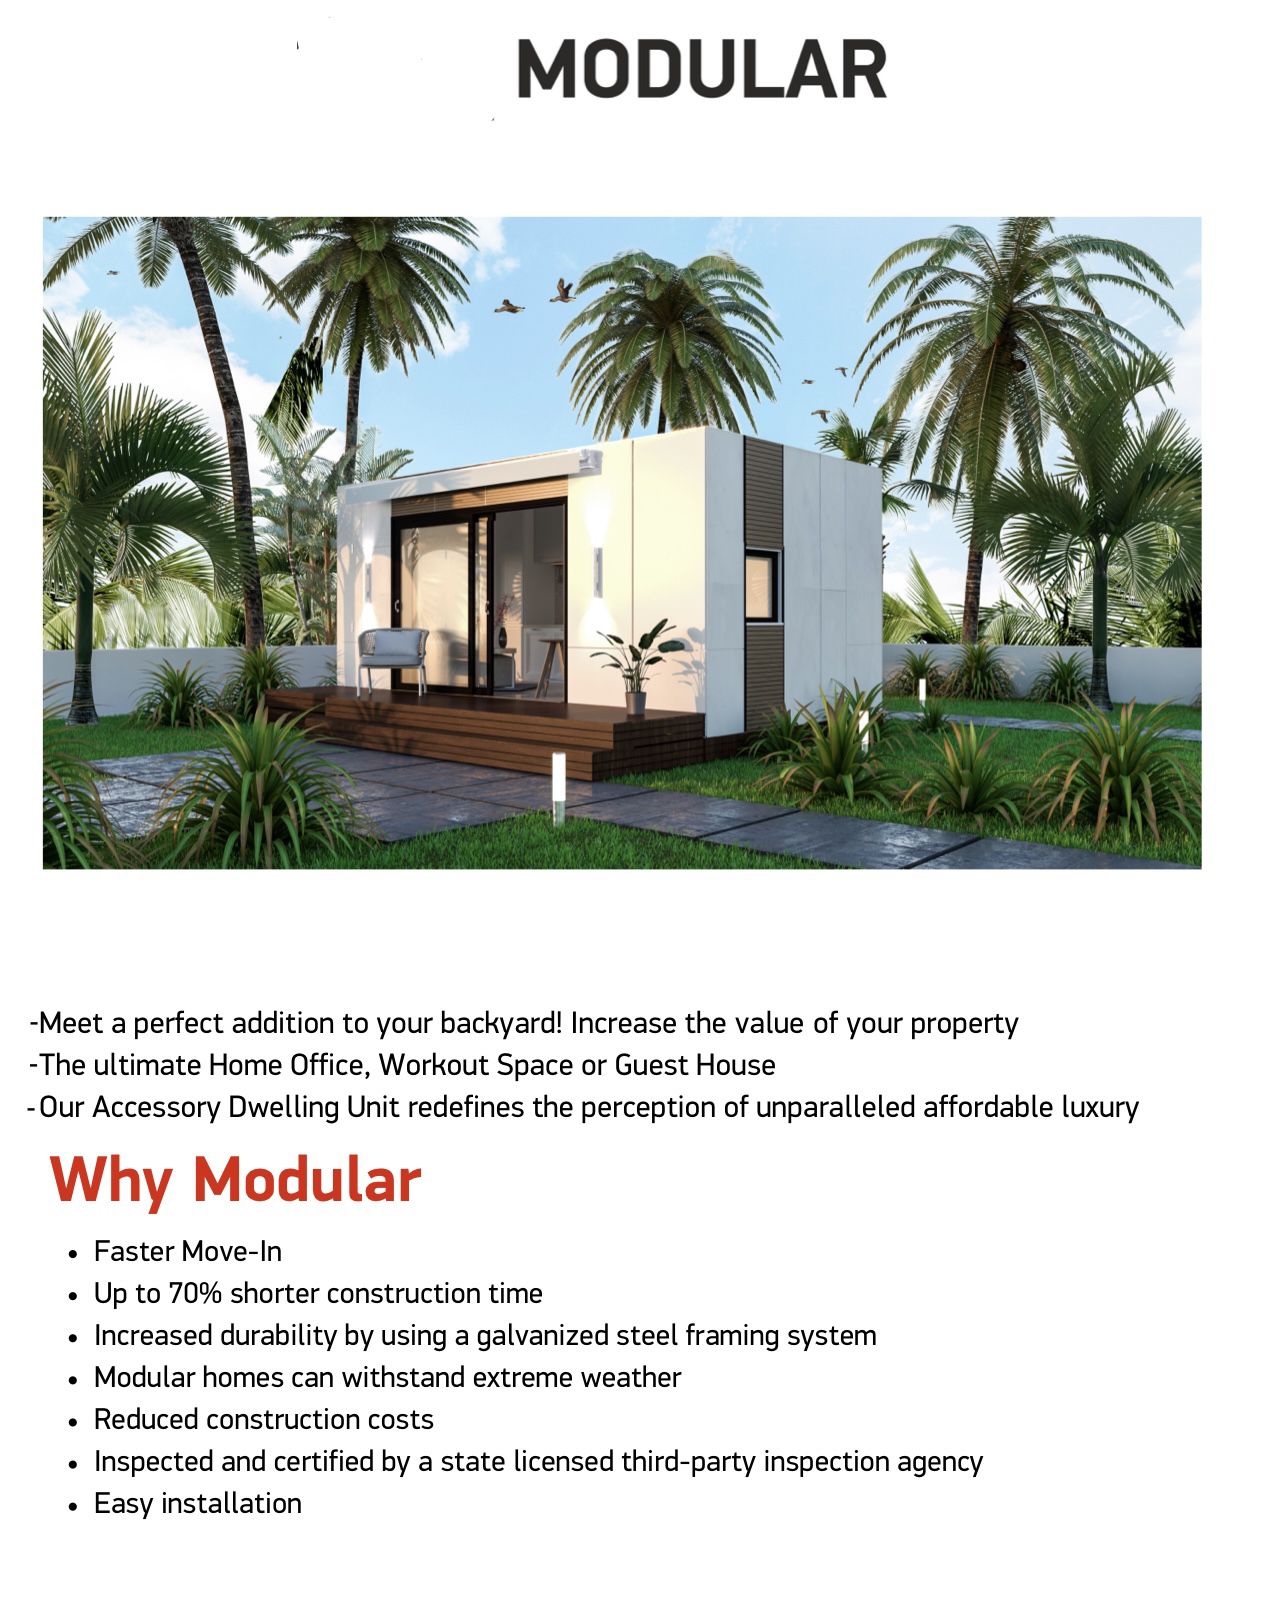 Modular Homes Houses Efficiencies For Category 5 Storms